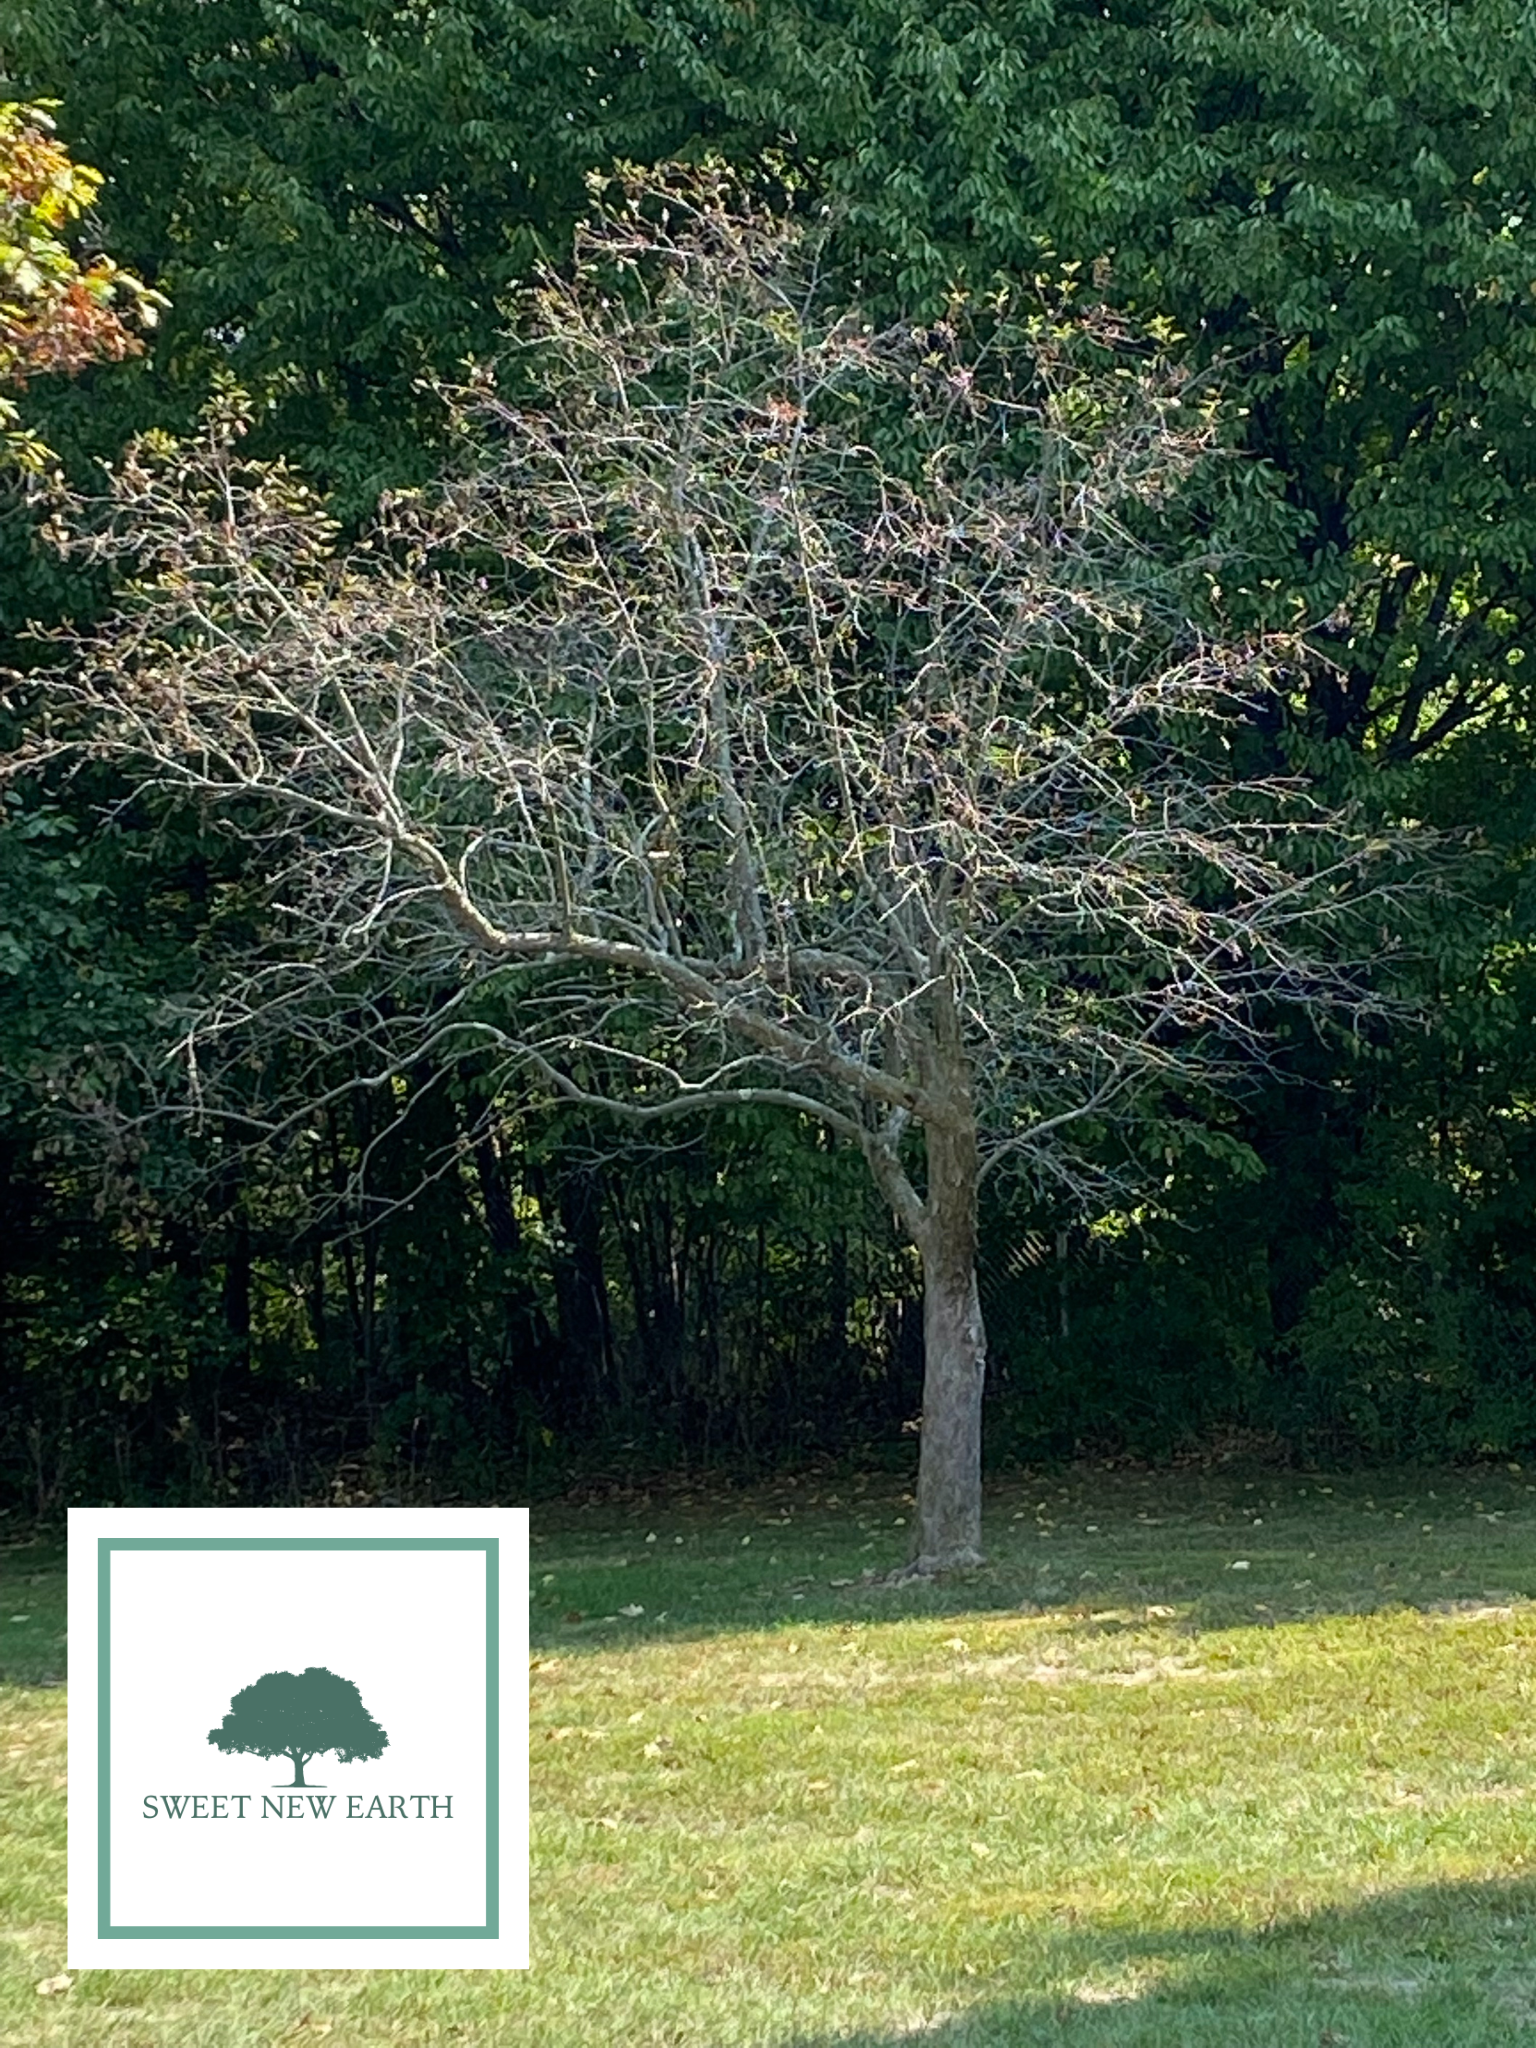 how to fix a badly pruned tree